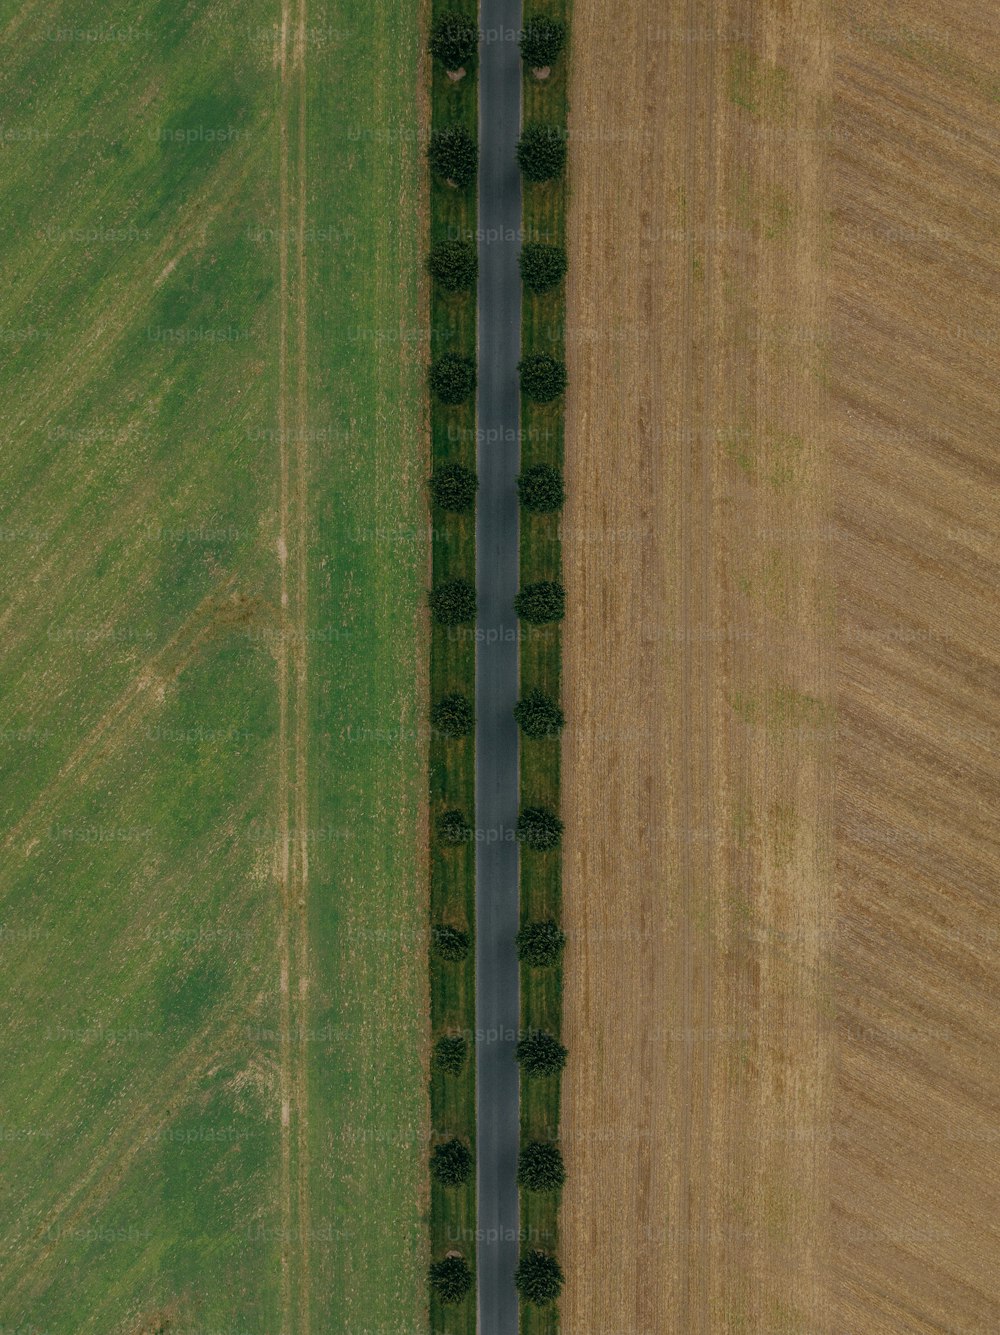 an aerial view of a road in a field